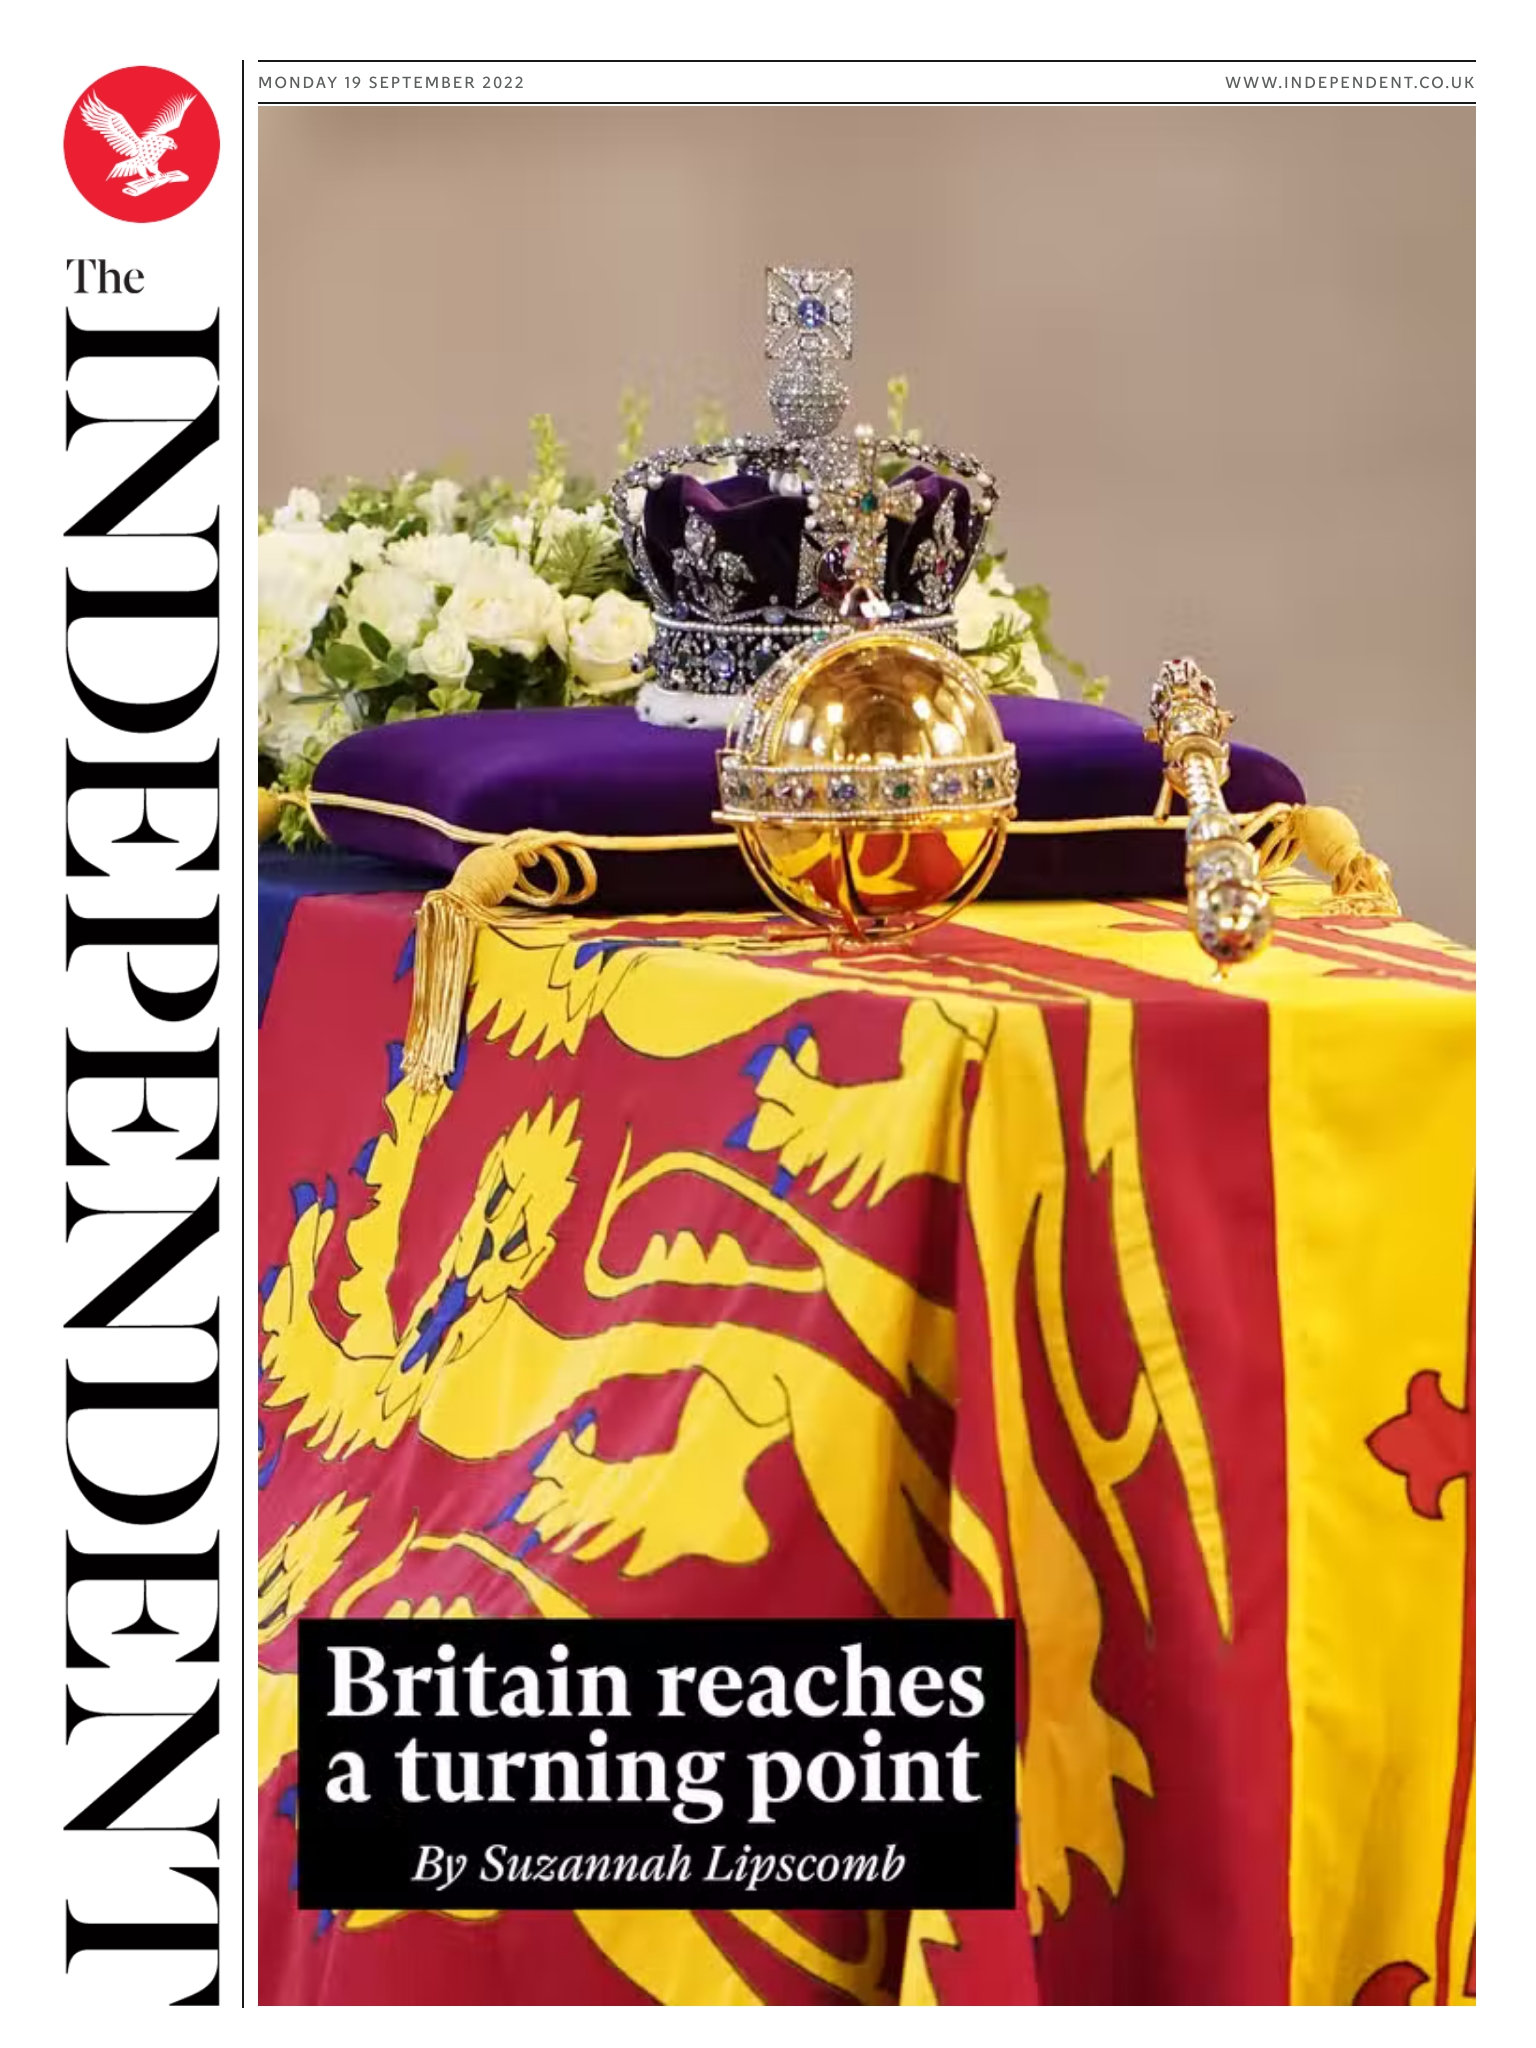 Independent - Britain reaches a turning point